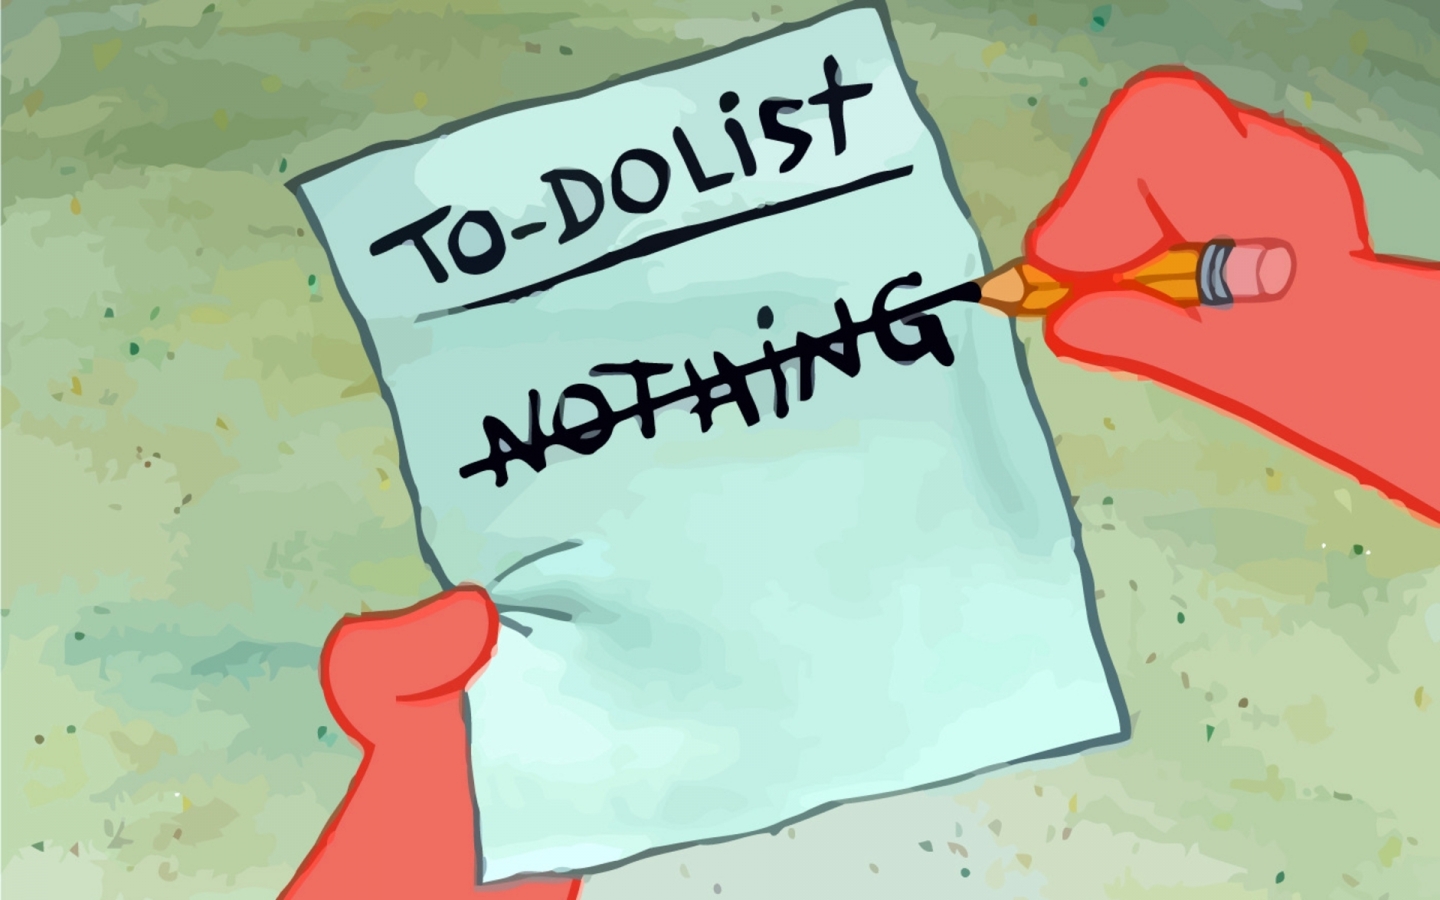 To-Do